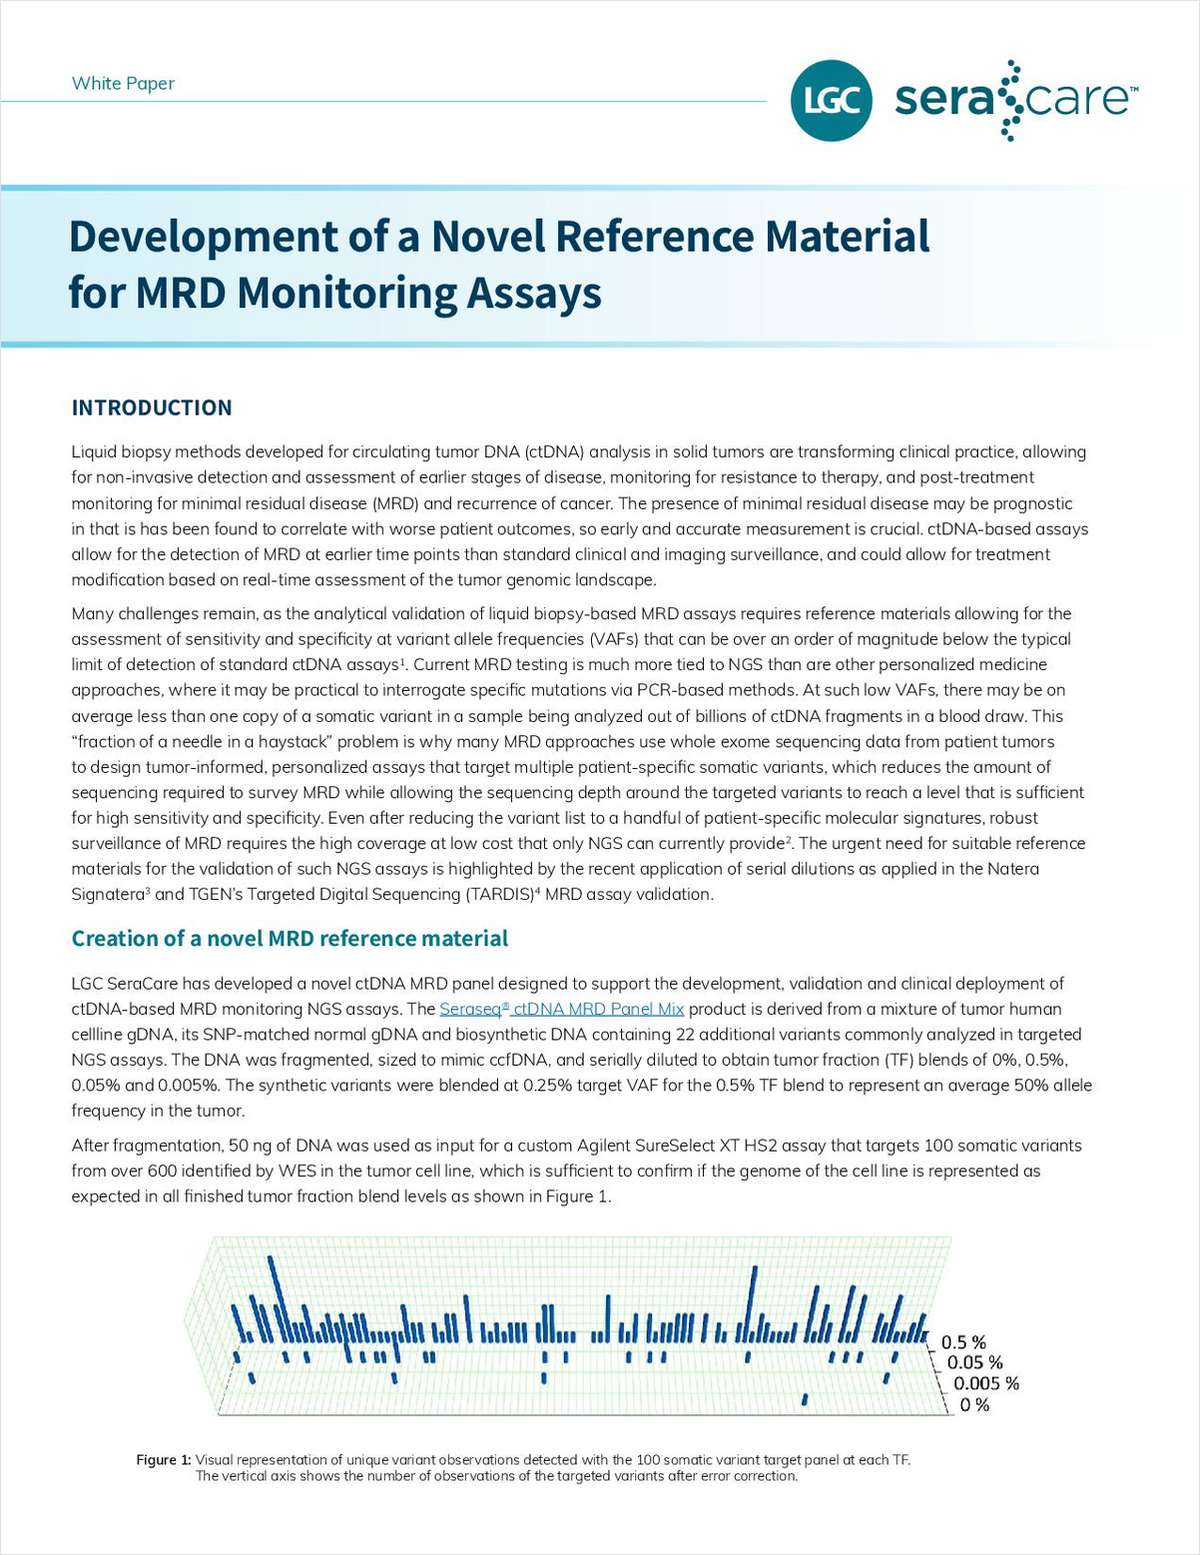 Development of a Novel Reference Material for Minimal Residual Disease Monitoring Assays